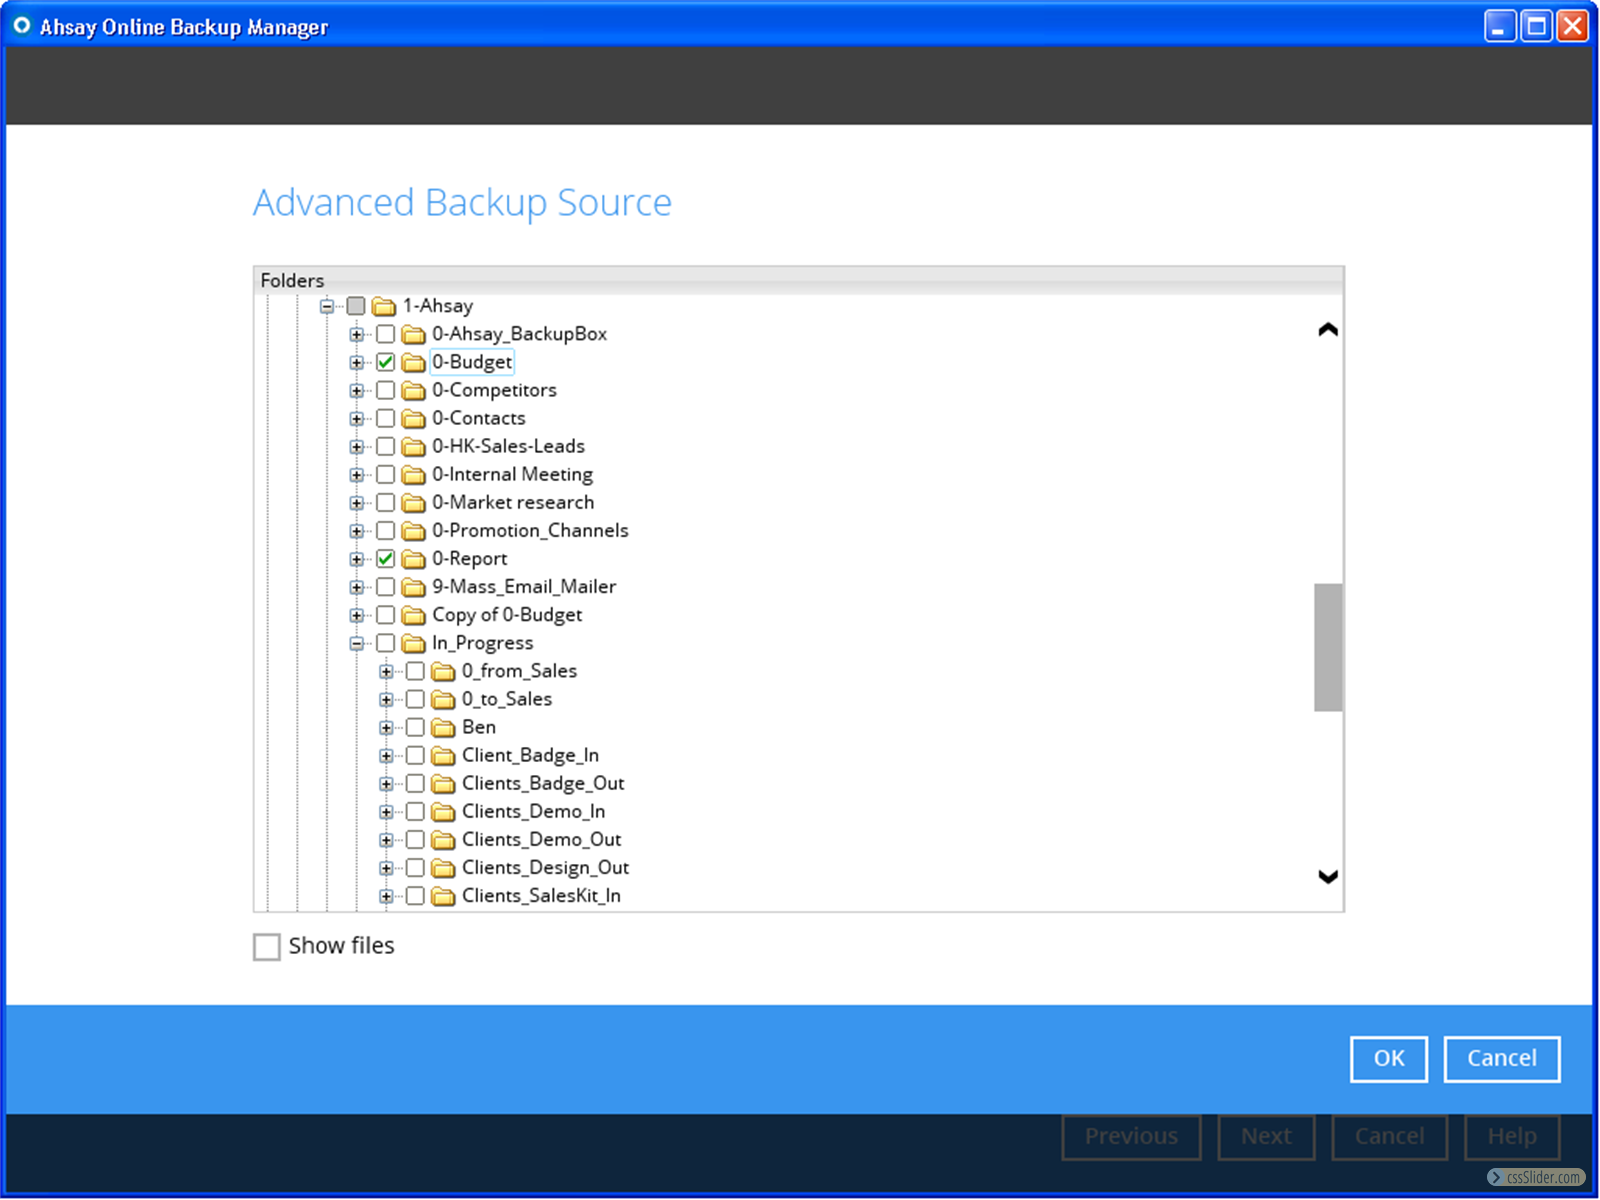 Quickly select files and folders to backup